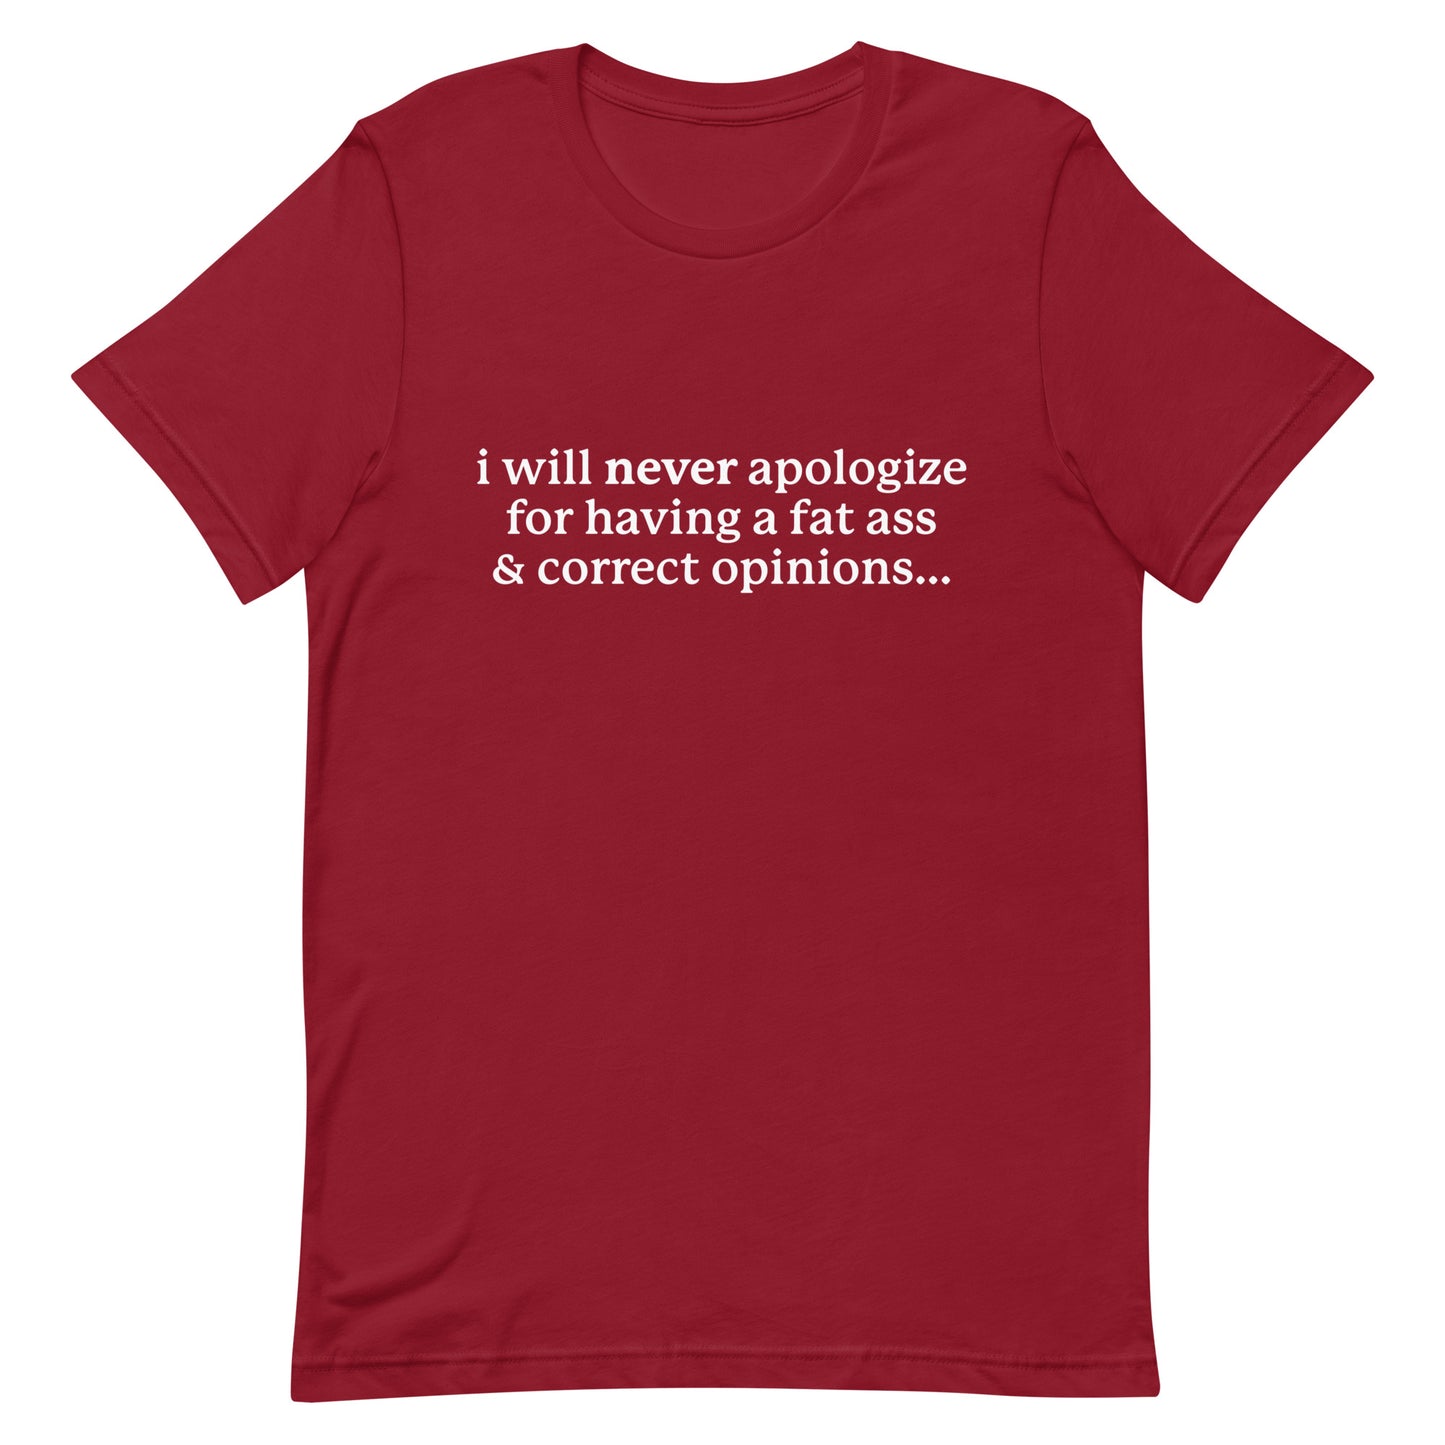 I Will Never Apologize (Fat Ass & Correct Opinions) Unisex t-shirt